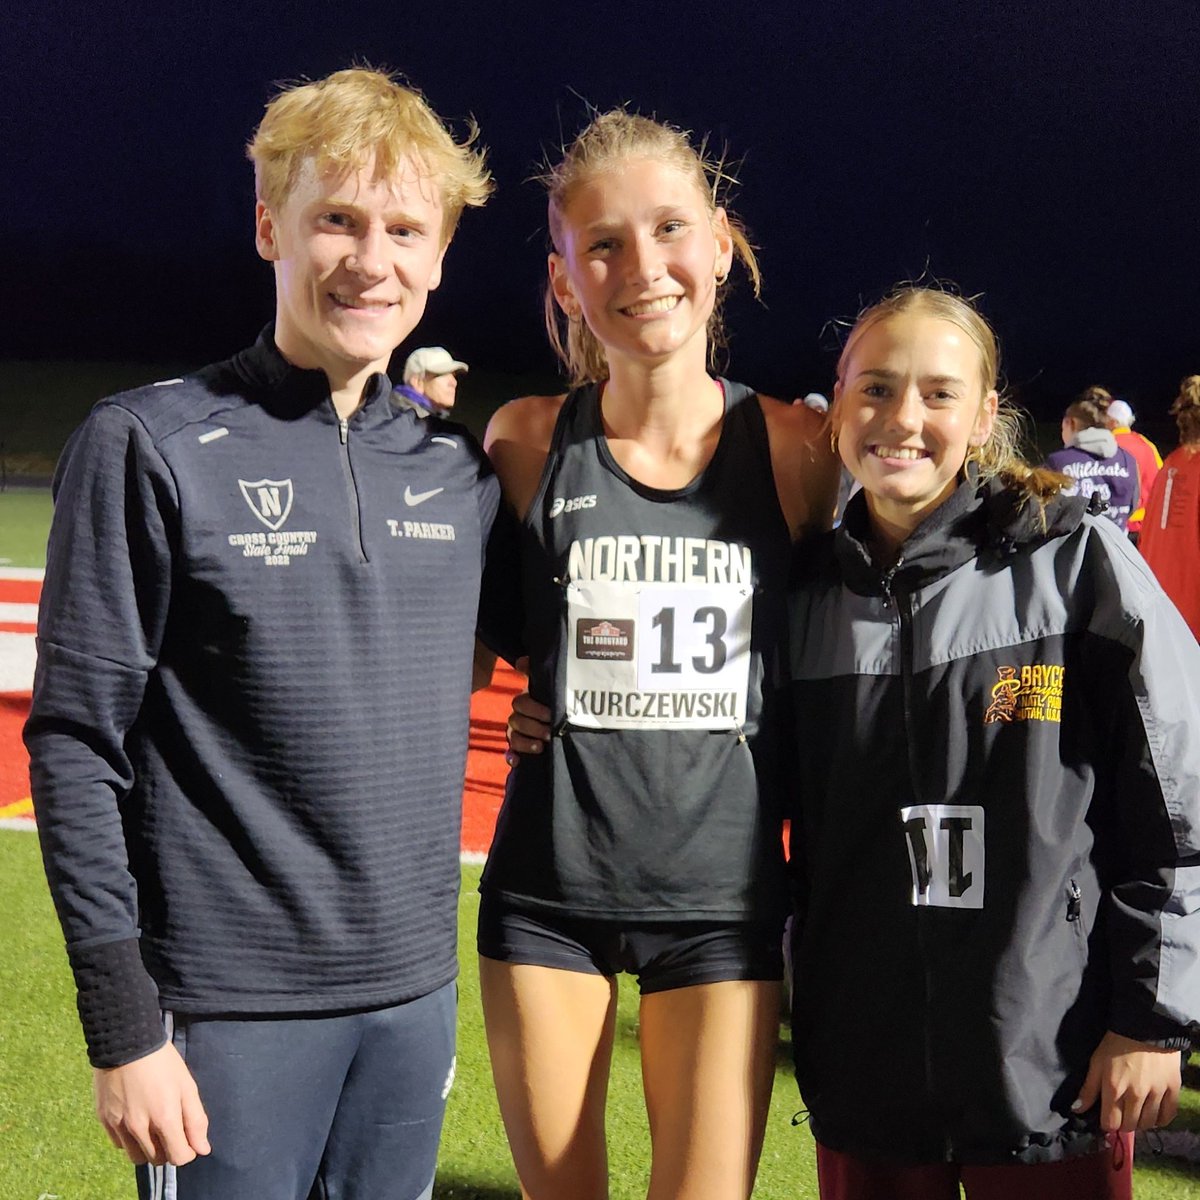 Congratulations to Walled Lake Northern's Ava Kurczewski on breaking the 5-minute mark and setting a new school record in the 1600 meter run 💙 #WEareWLCSD

Story ➡ wlcsd.org/community/dist…